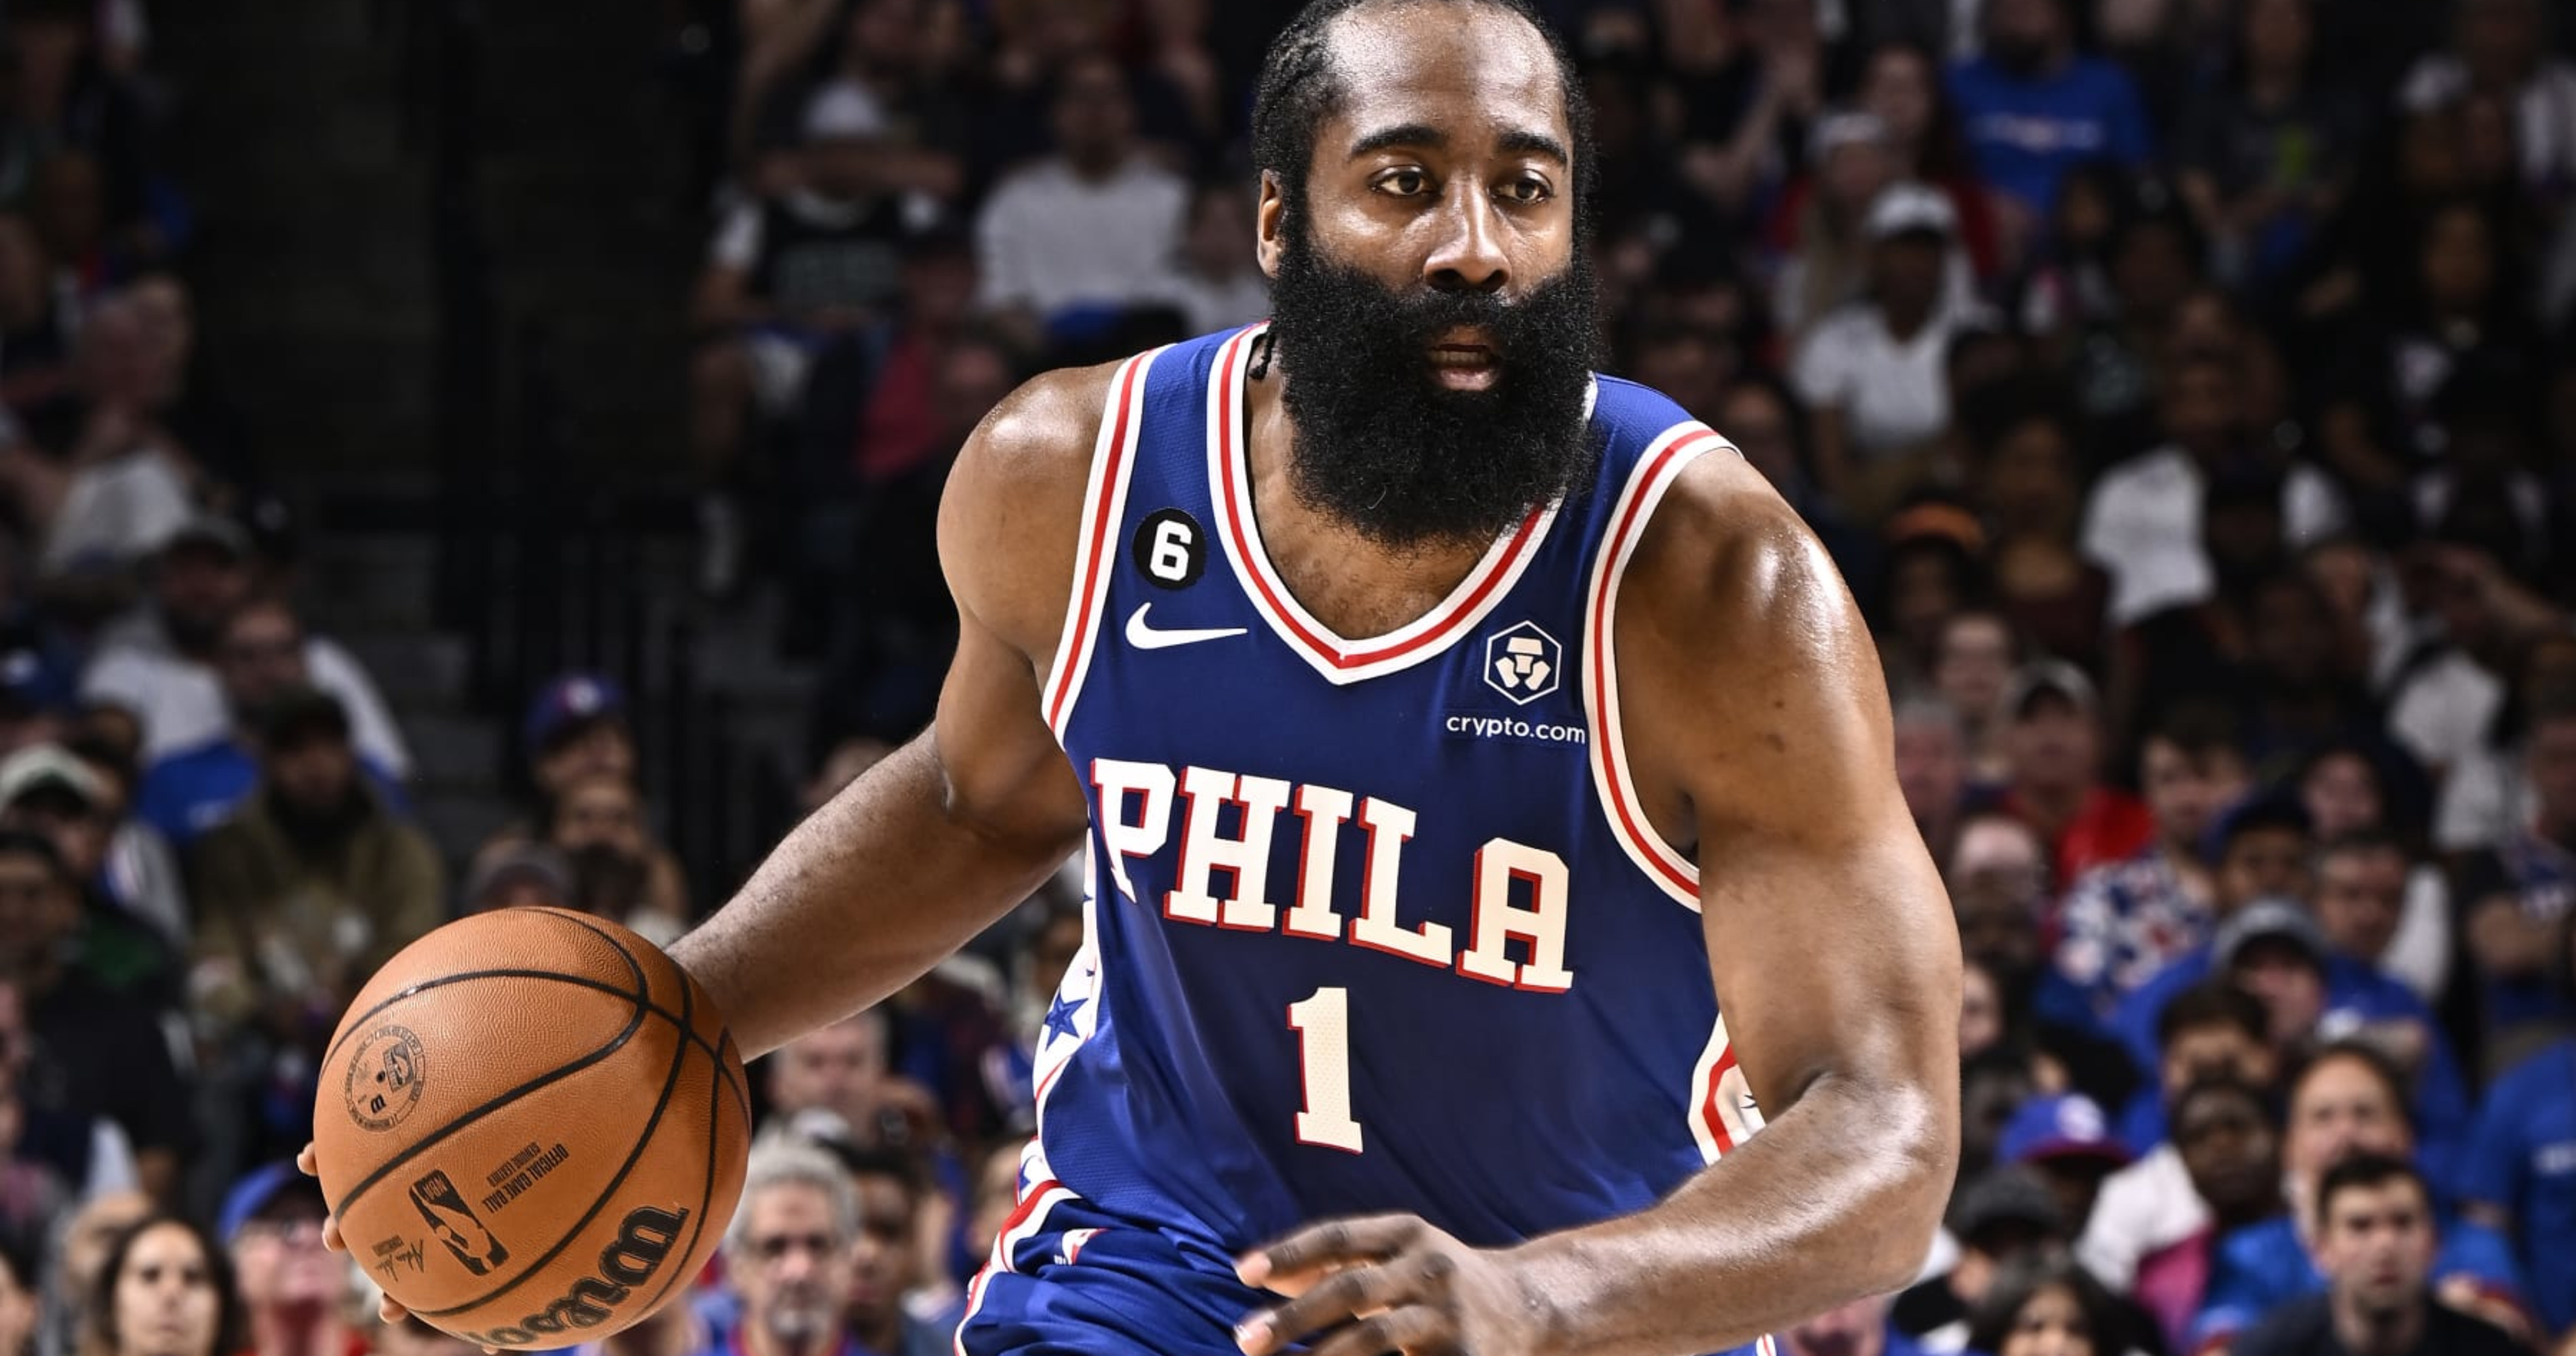 James Harden introduced, expected to make Sixers debut after All-Star break